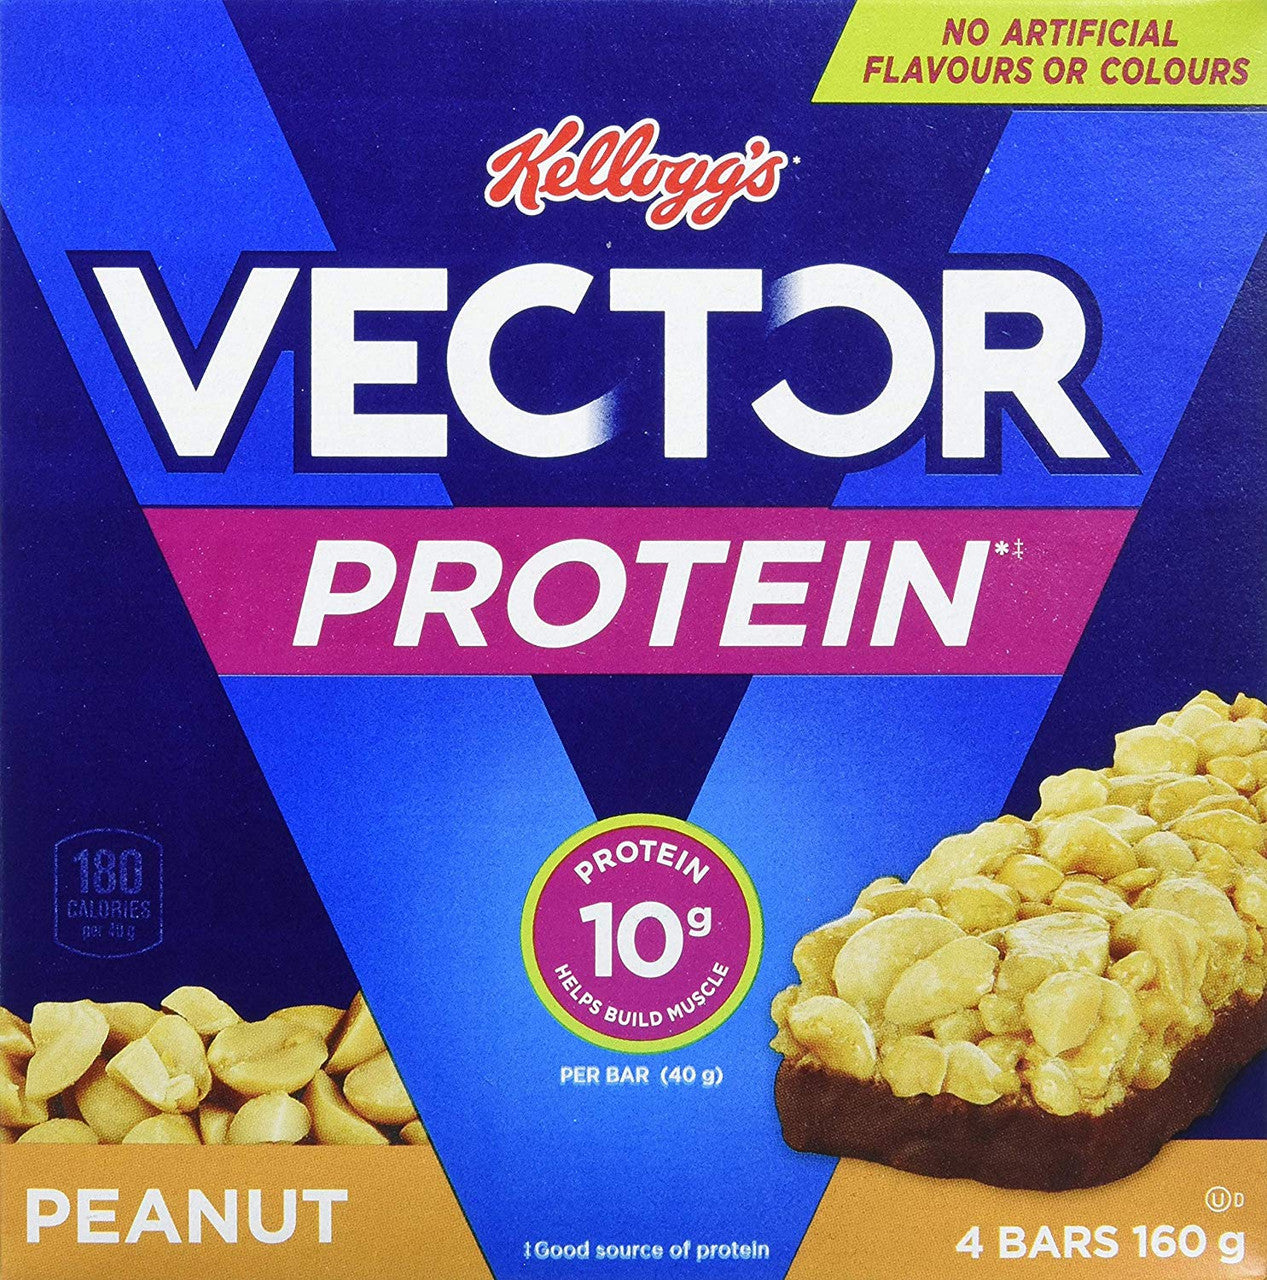 Kellogg's Vector Protein bars, Peanut, 4ct, 160g/5.6oz. (Imported from Canada)